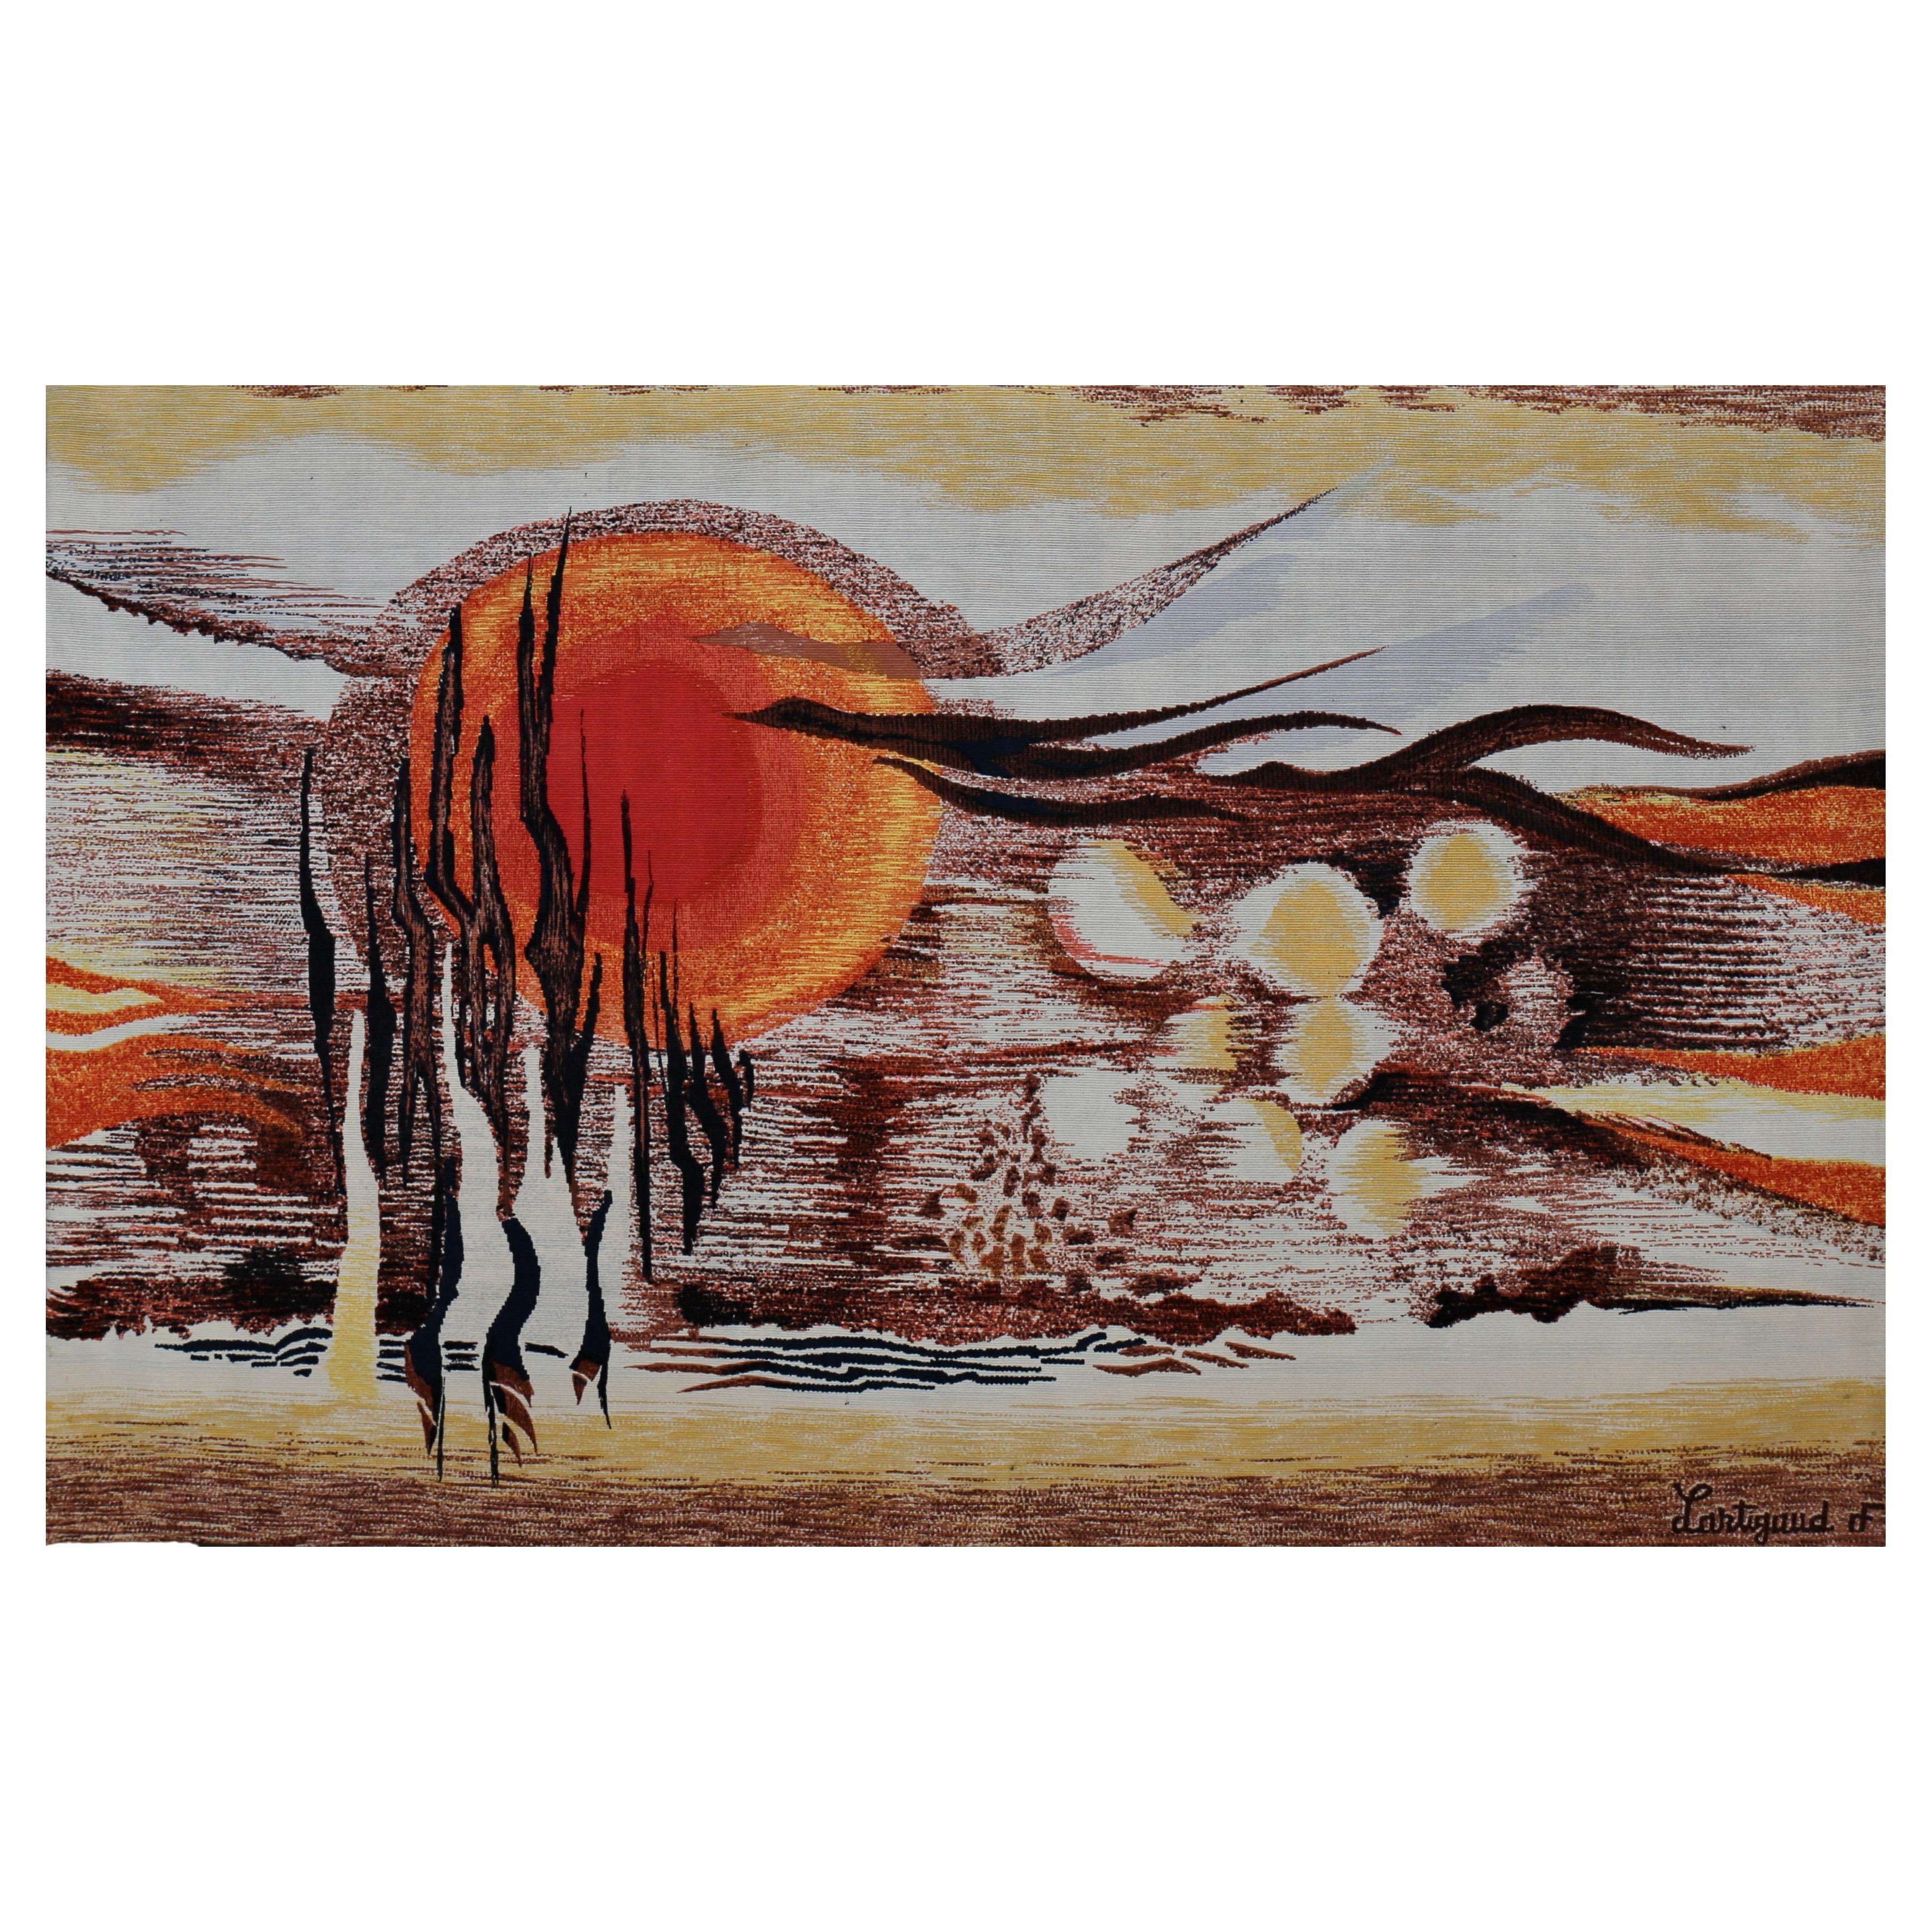 Tapestry in Wool "Land on Fire" by Jean Michel Lartigaud